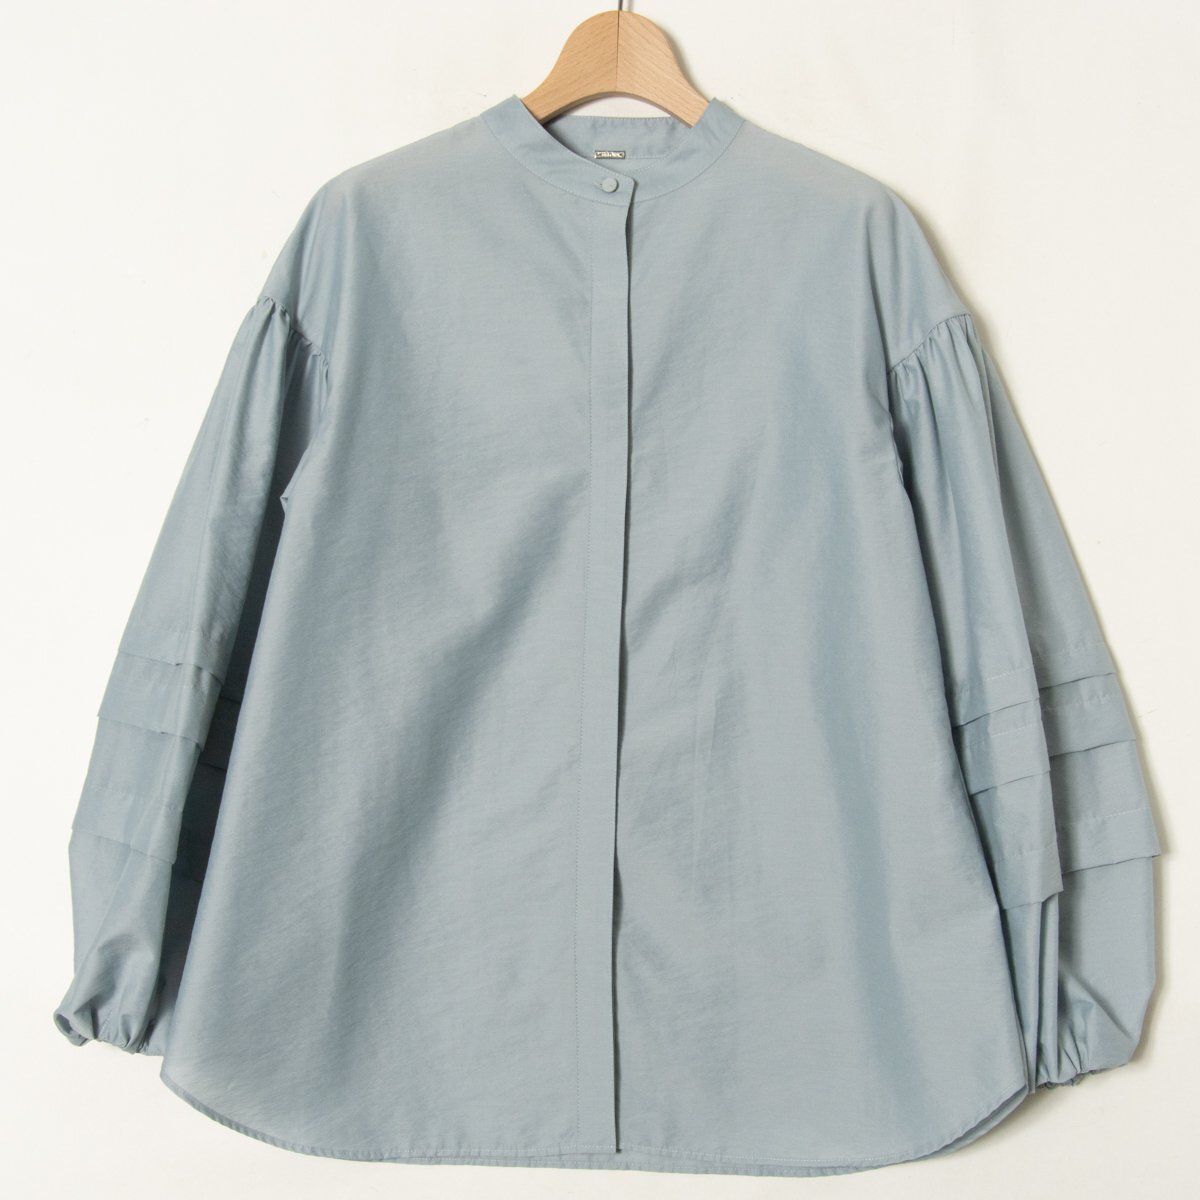 Mila Owen Mira o-wen stand-up collar tuck sleeve blouse 09WFB221204 0 blue blue lady's woman woman casual adult spring 